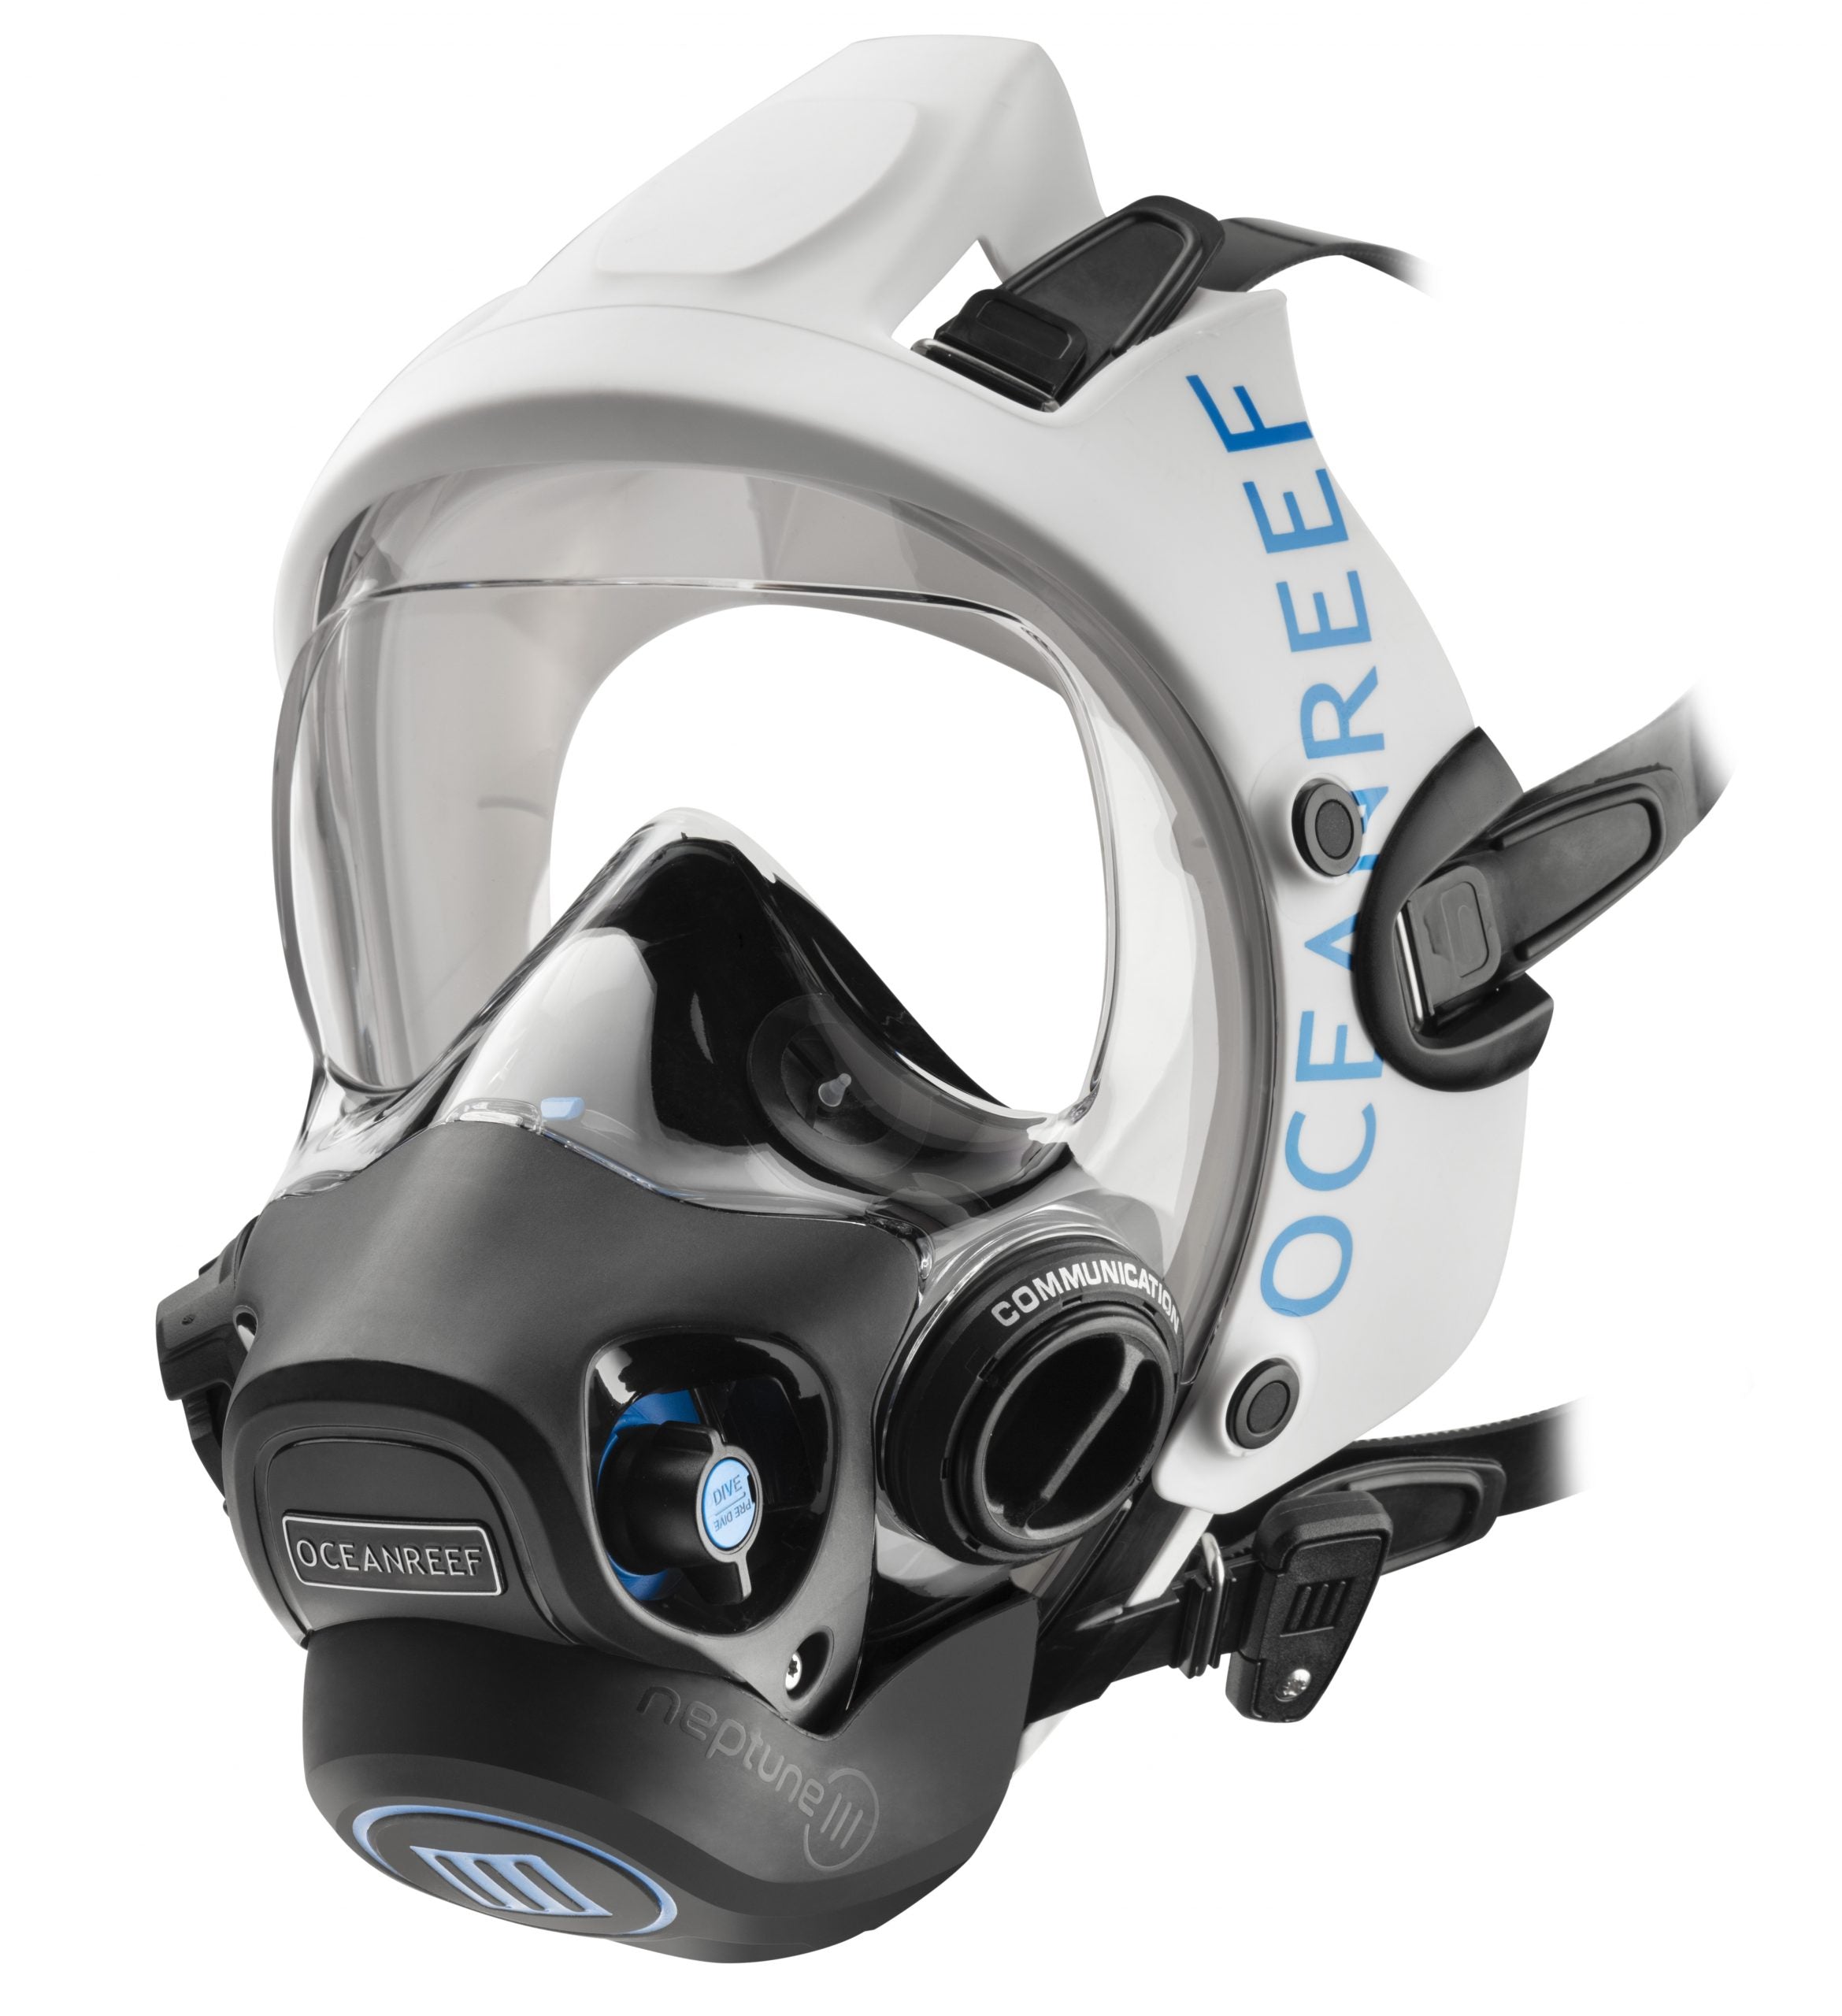 Open Box Ocean Reef Neptune III Package - Diving Full face mask w/int 2nd st, surface air valve, hose, pressure gauge, octopus, SL35TX INT first stage + bump + quick connection hose